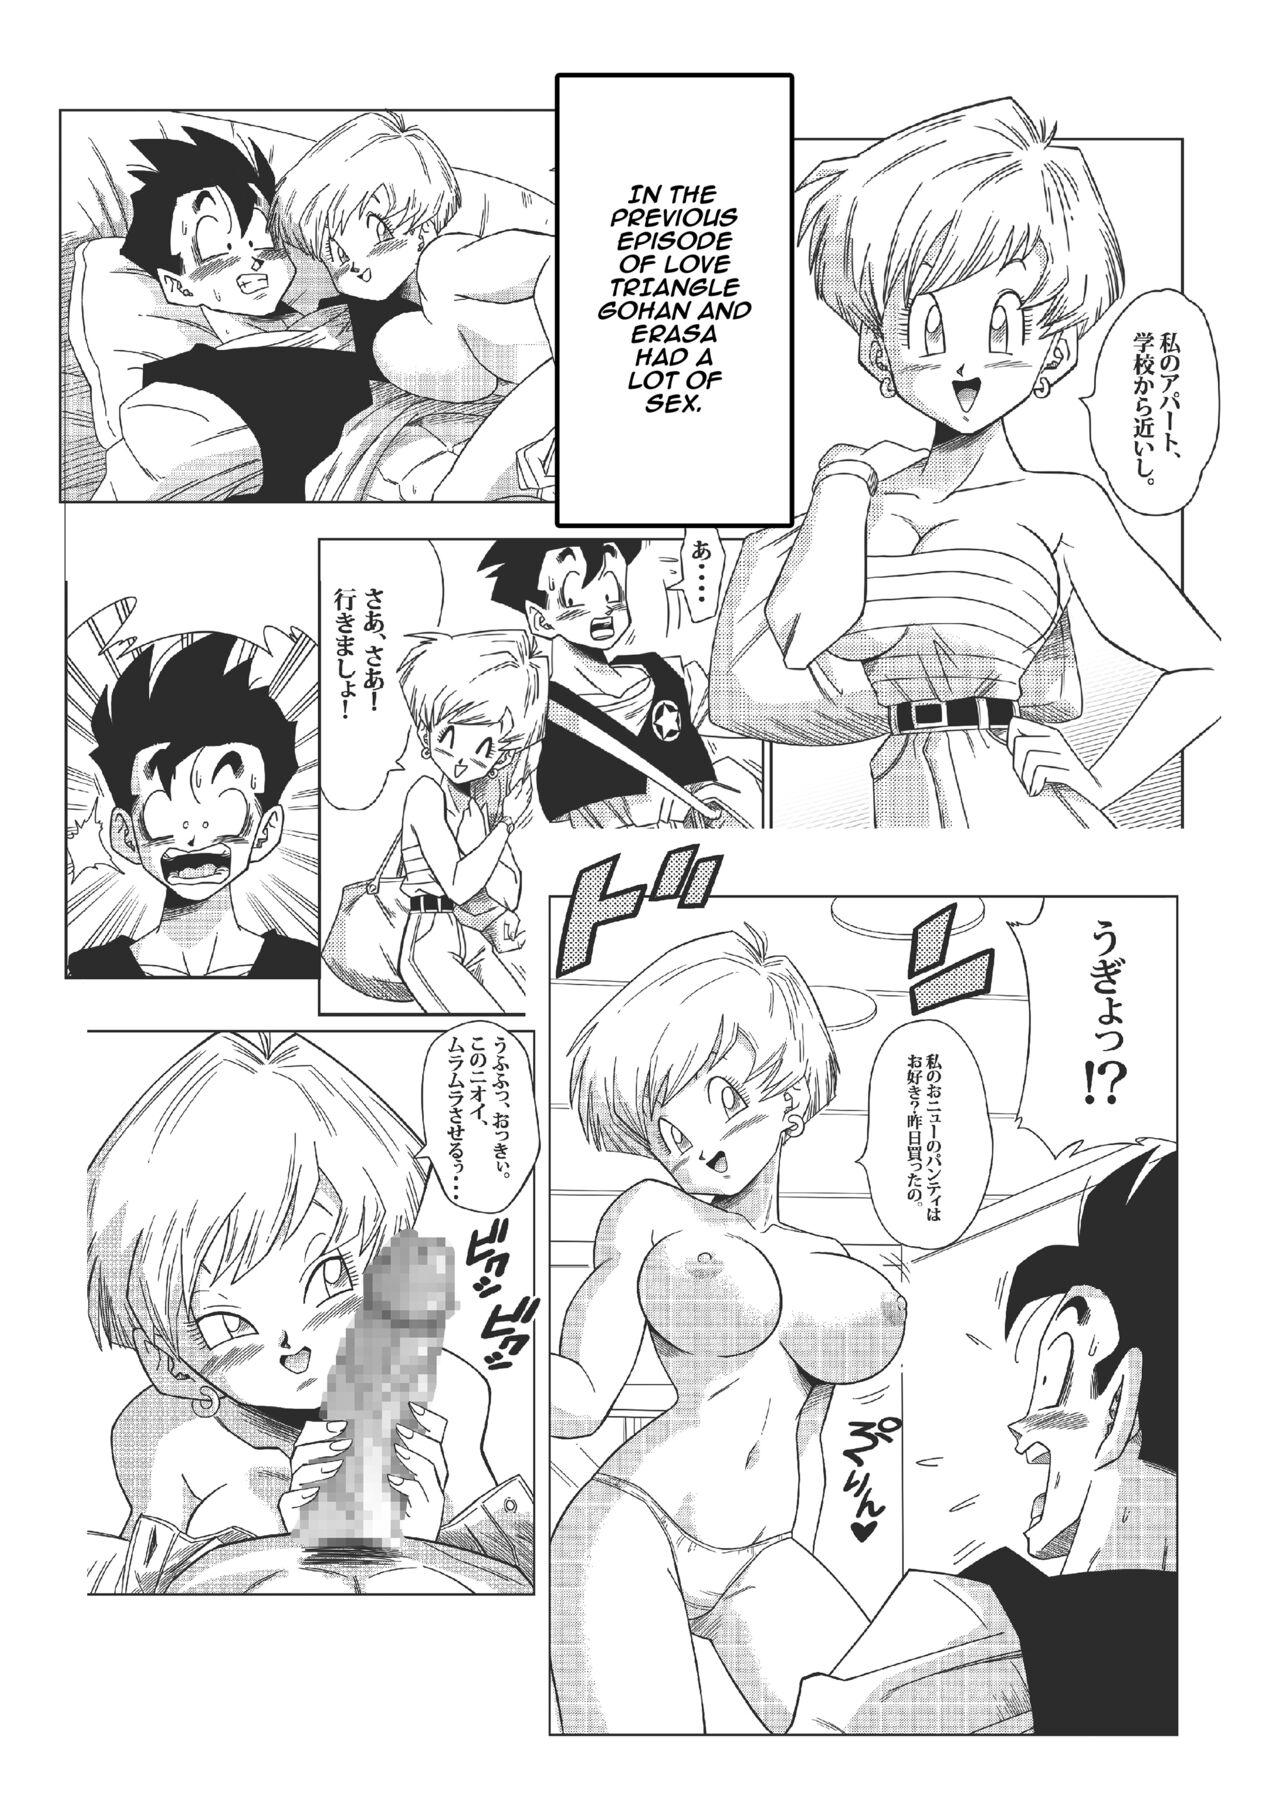 Strapon LOVE TRIANGLE Z - Part 2 Stud - Page 2